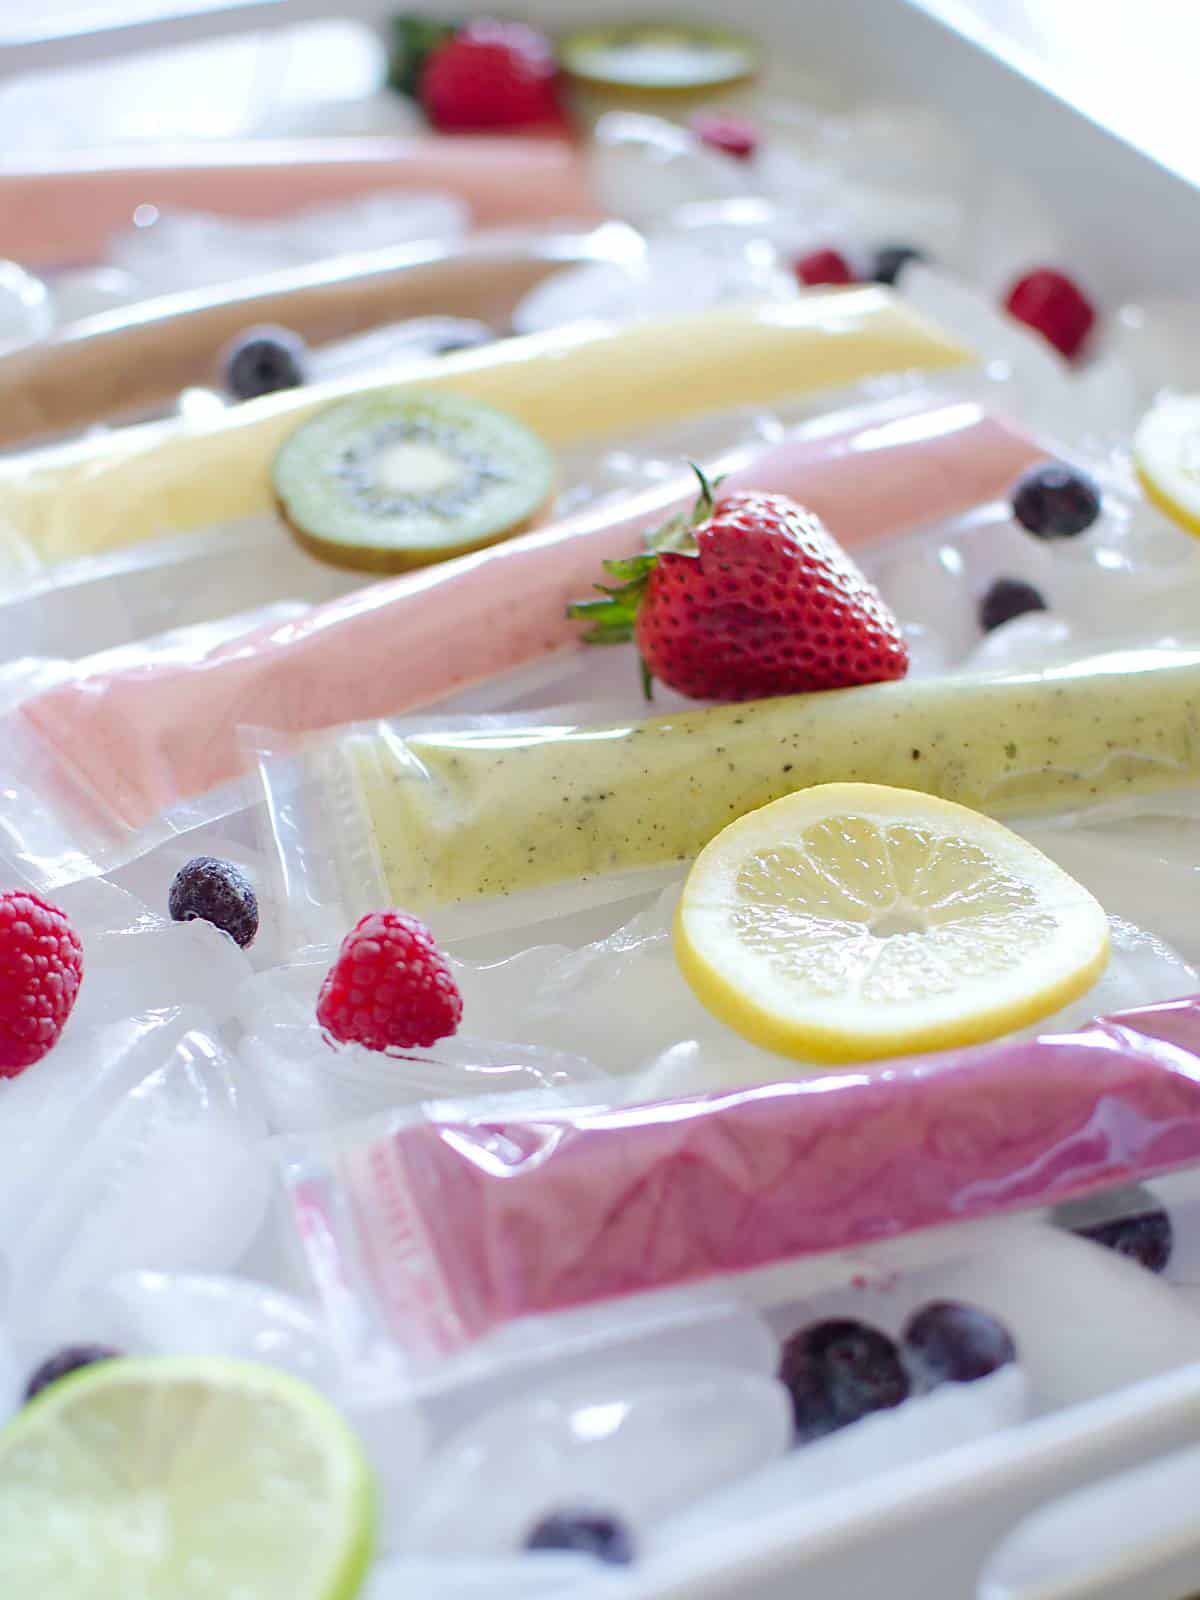 Homemade gogurts on a tray with fresh strawberries, kiwi, lemon slices and blueberries.